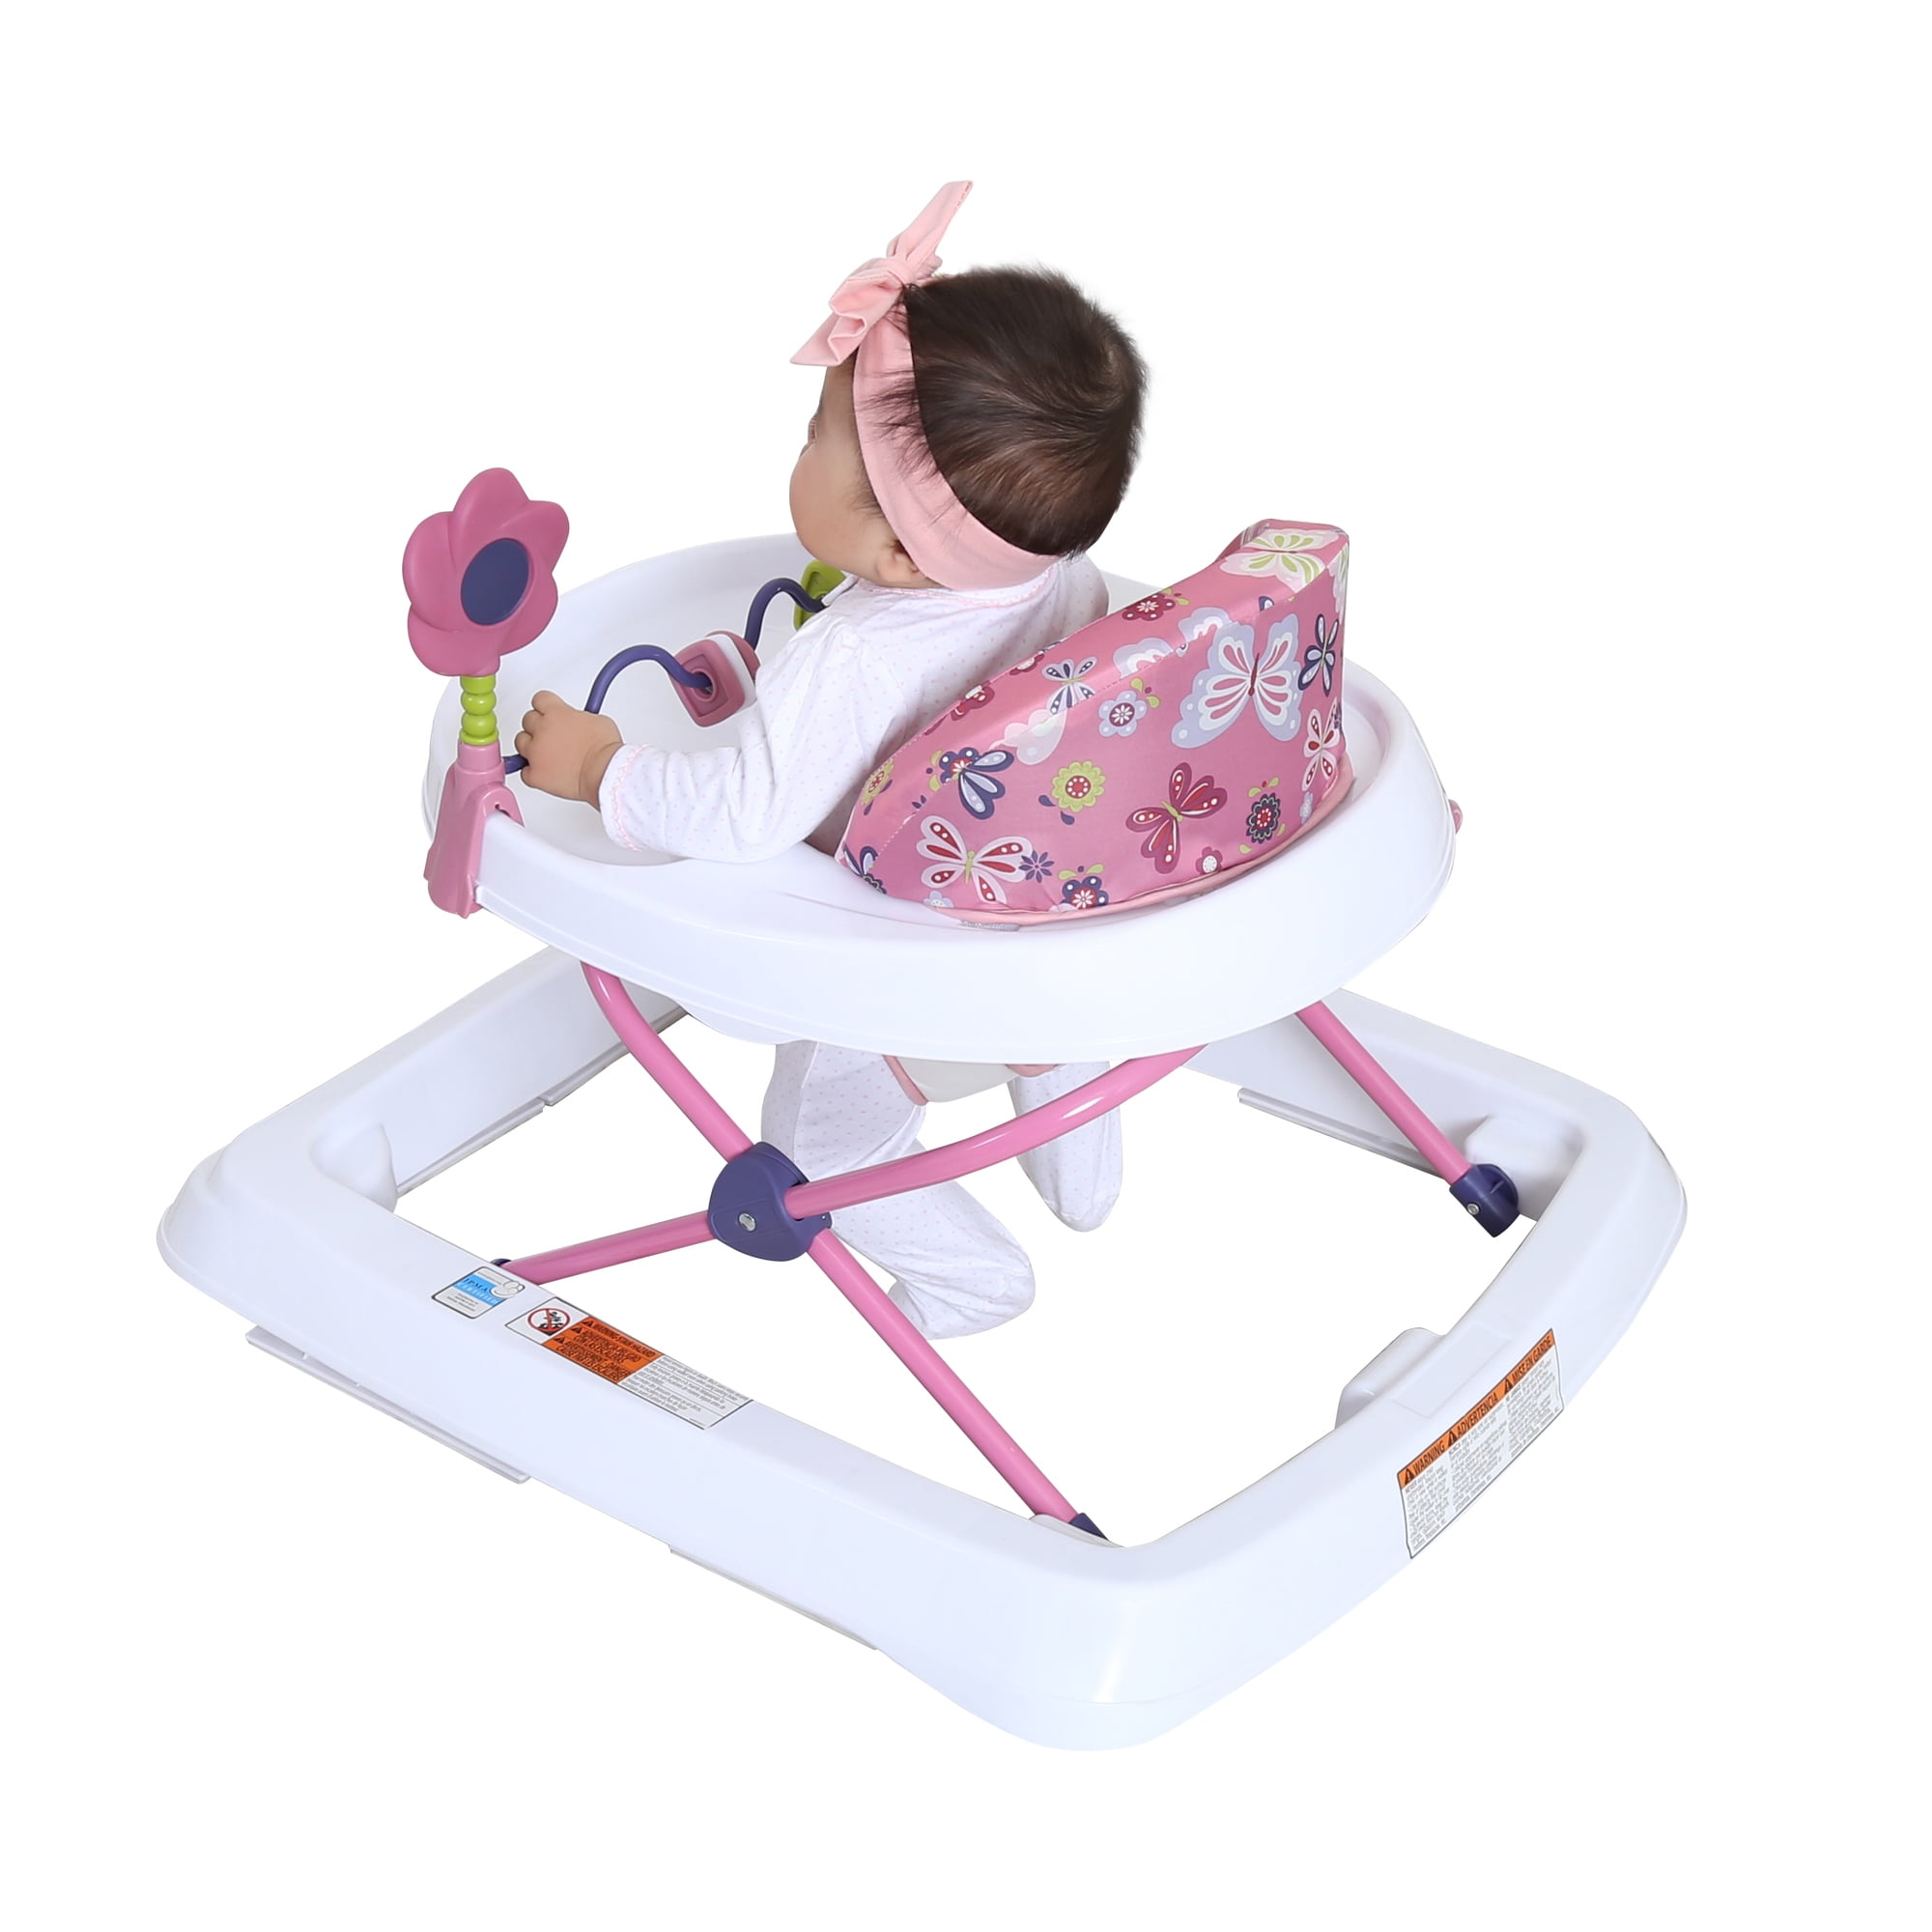 Baby Trend Walker Emily 1-24 months Adjustable Height With Tray BRAND NEW